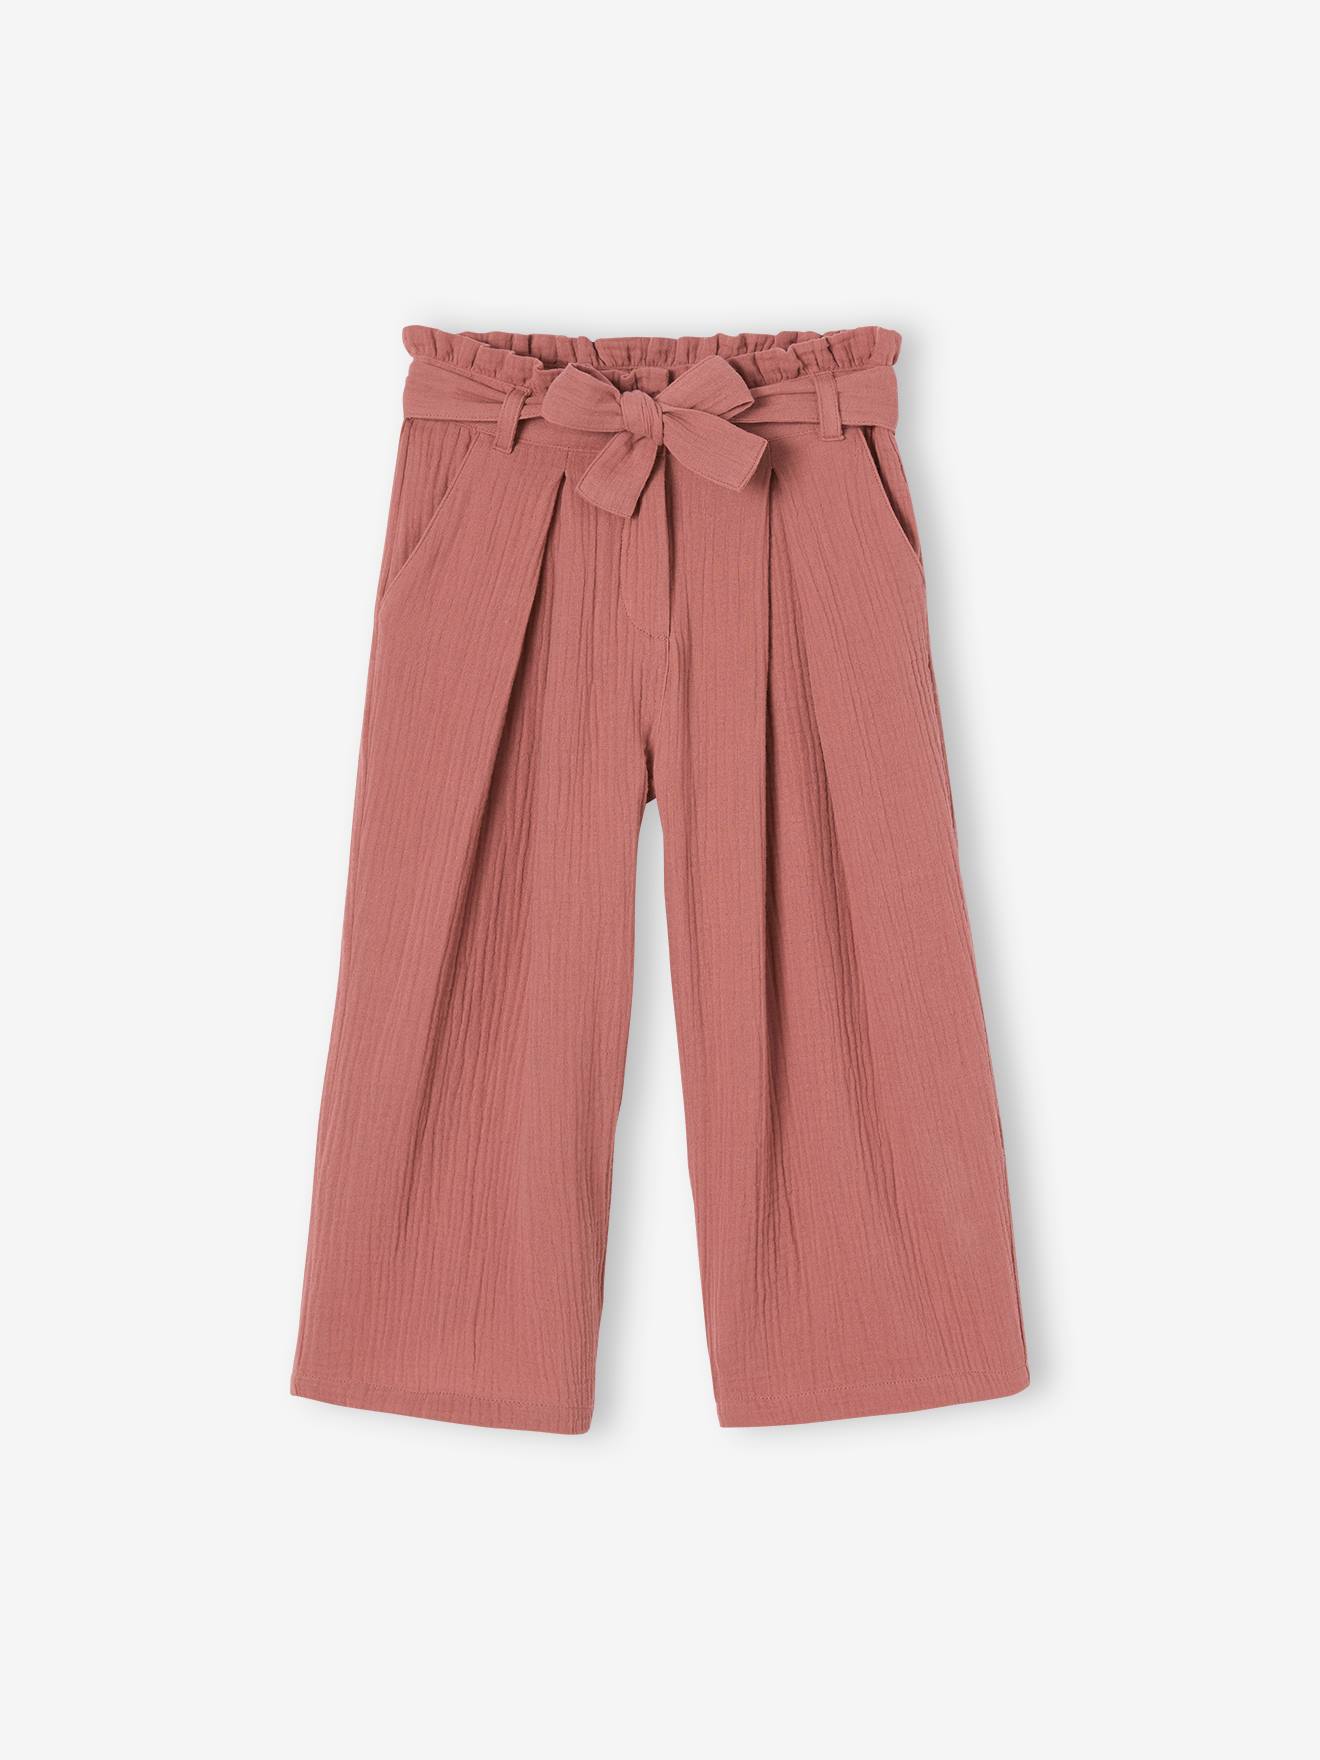 Cropped, Wide Leg Paperbag Trousers in Cotton Gauze for Girls old rose